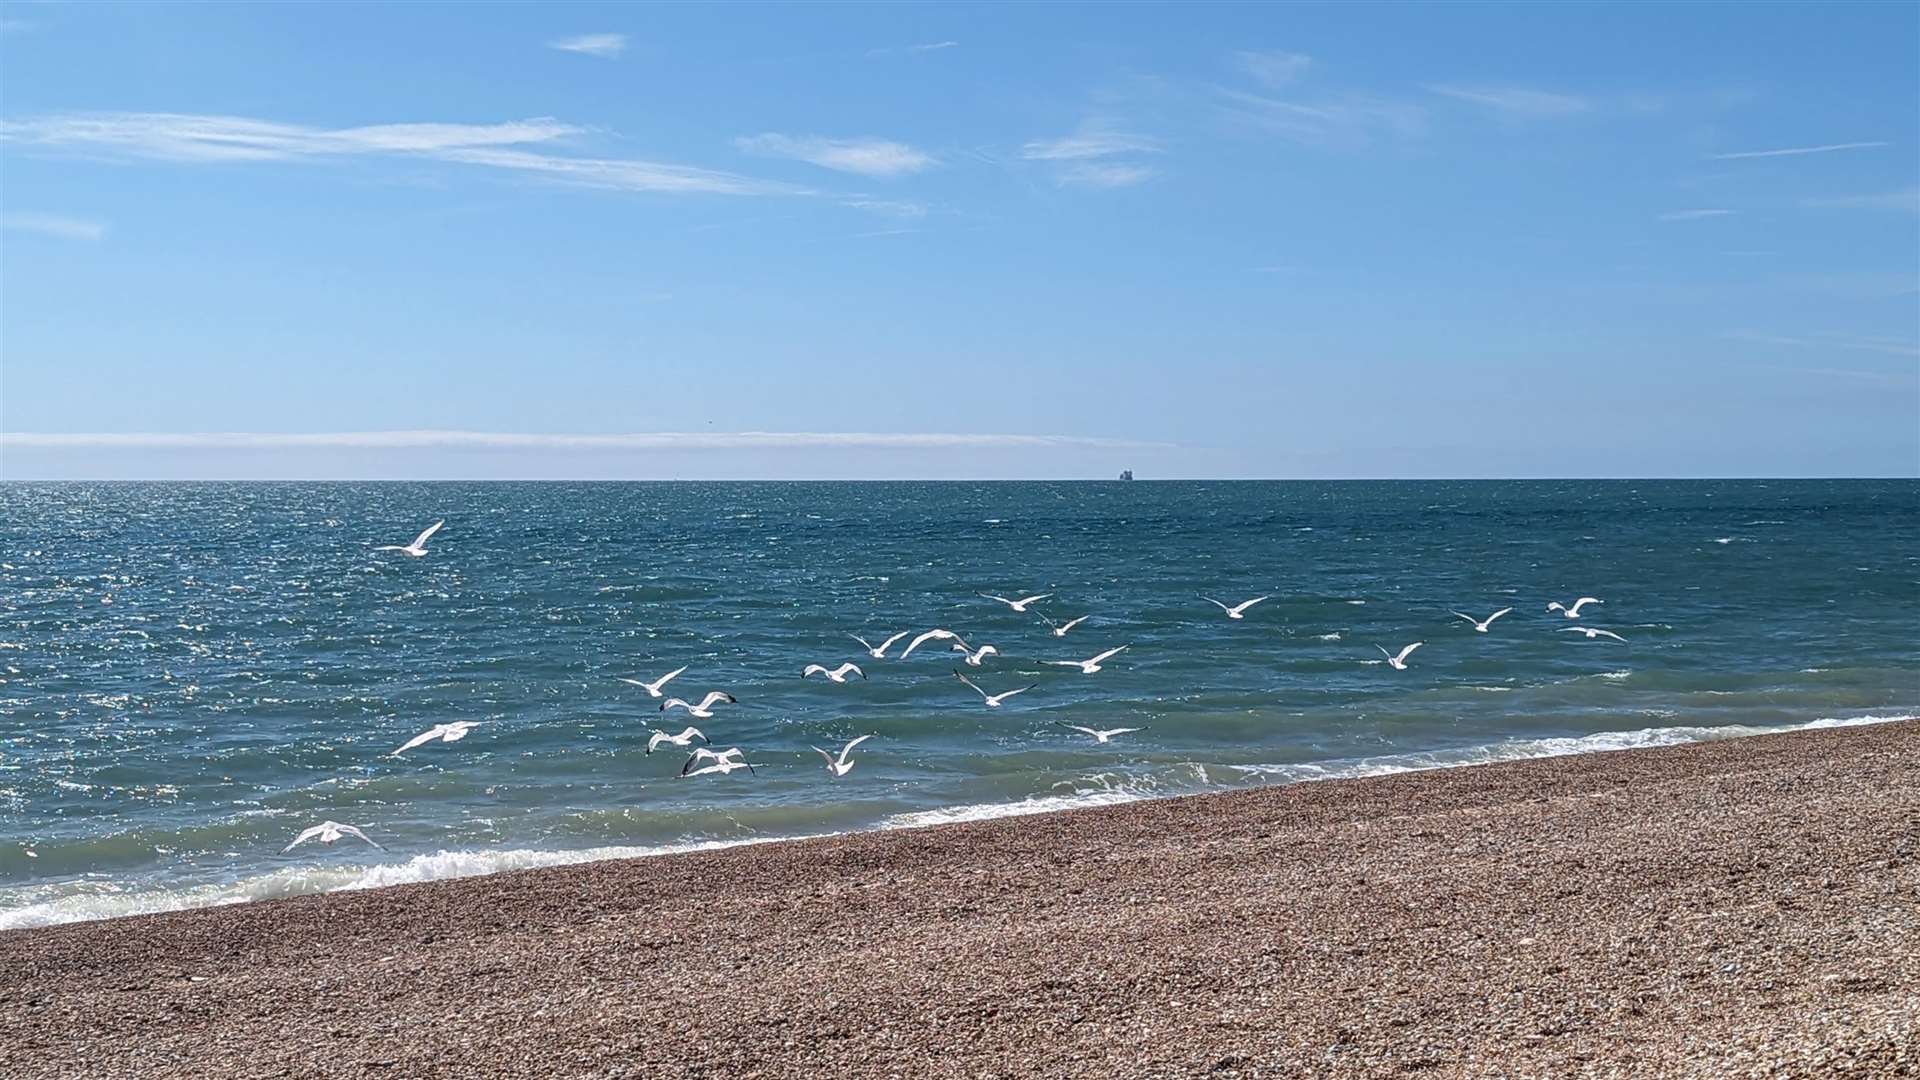 Gulls take flight from the beach at Dungeness